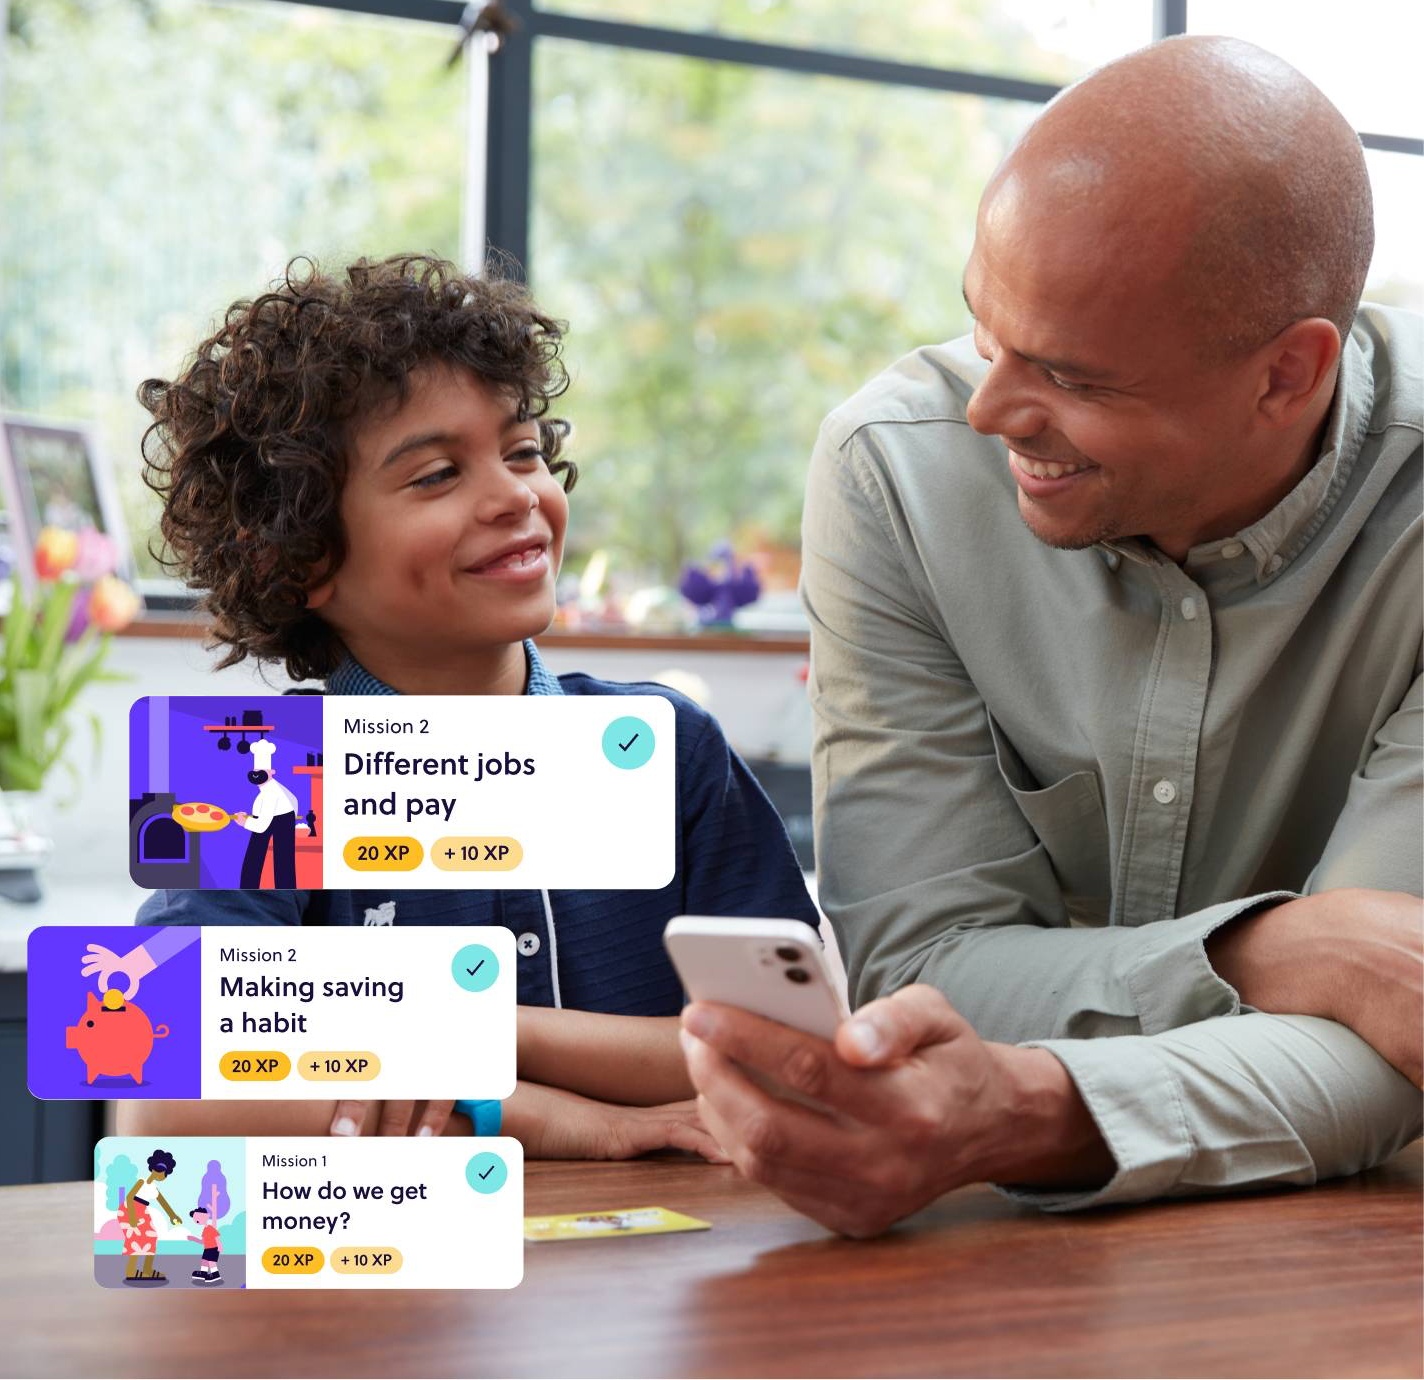 Children's finance startup GoHenry enters Europe with acquisition of Pixpay – TechCrunch